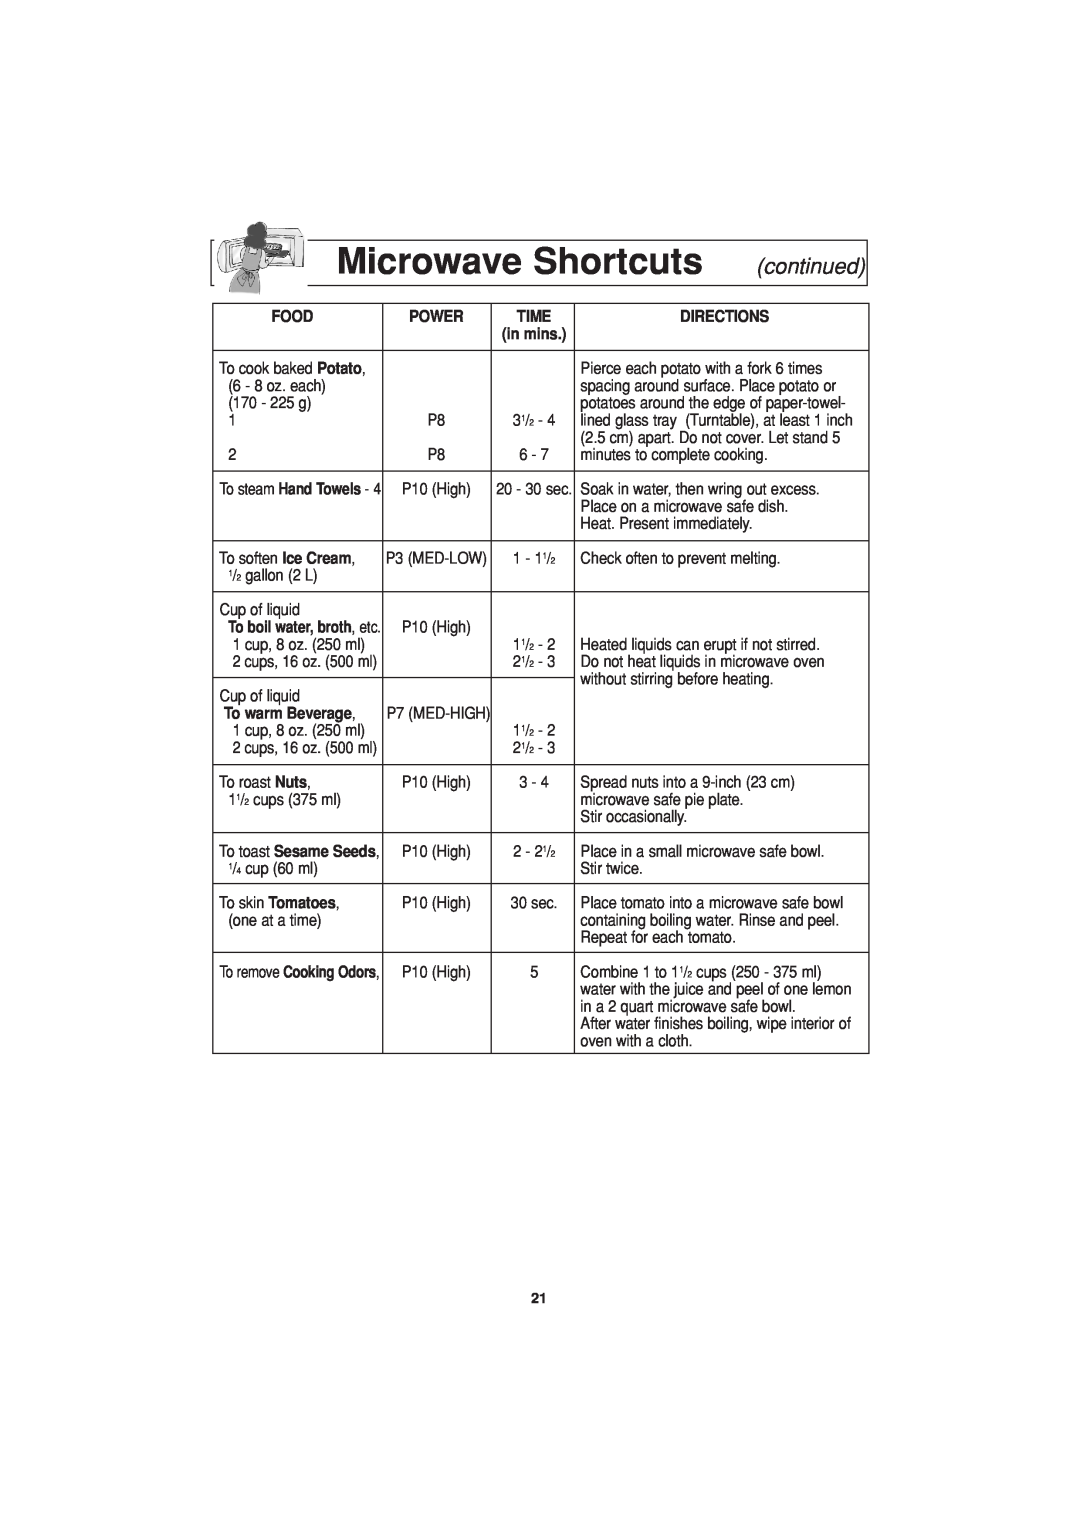 Panasonic NN-T694 operating instructions Microwave Shortcuts, continued, Food, Directions, To warm Beverage 